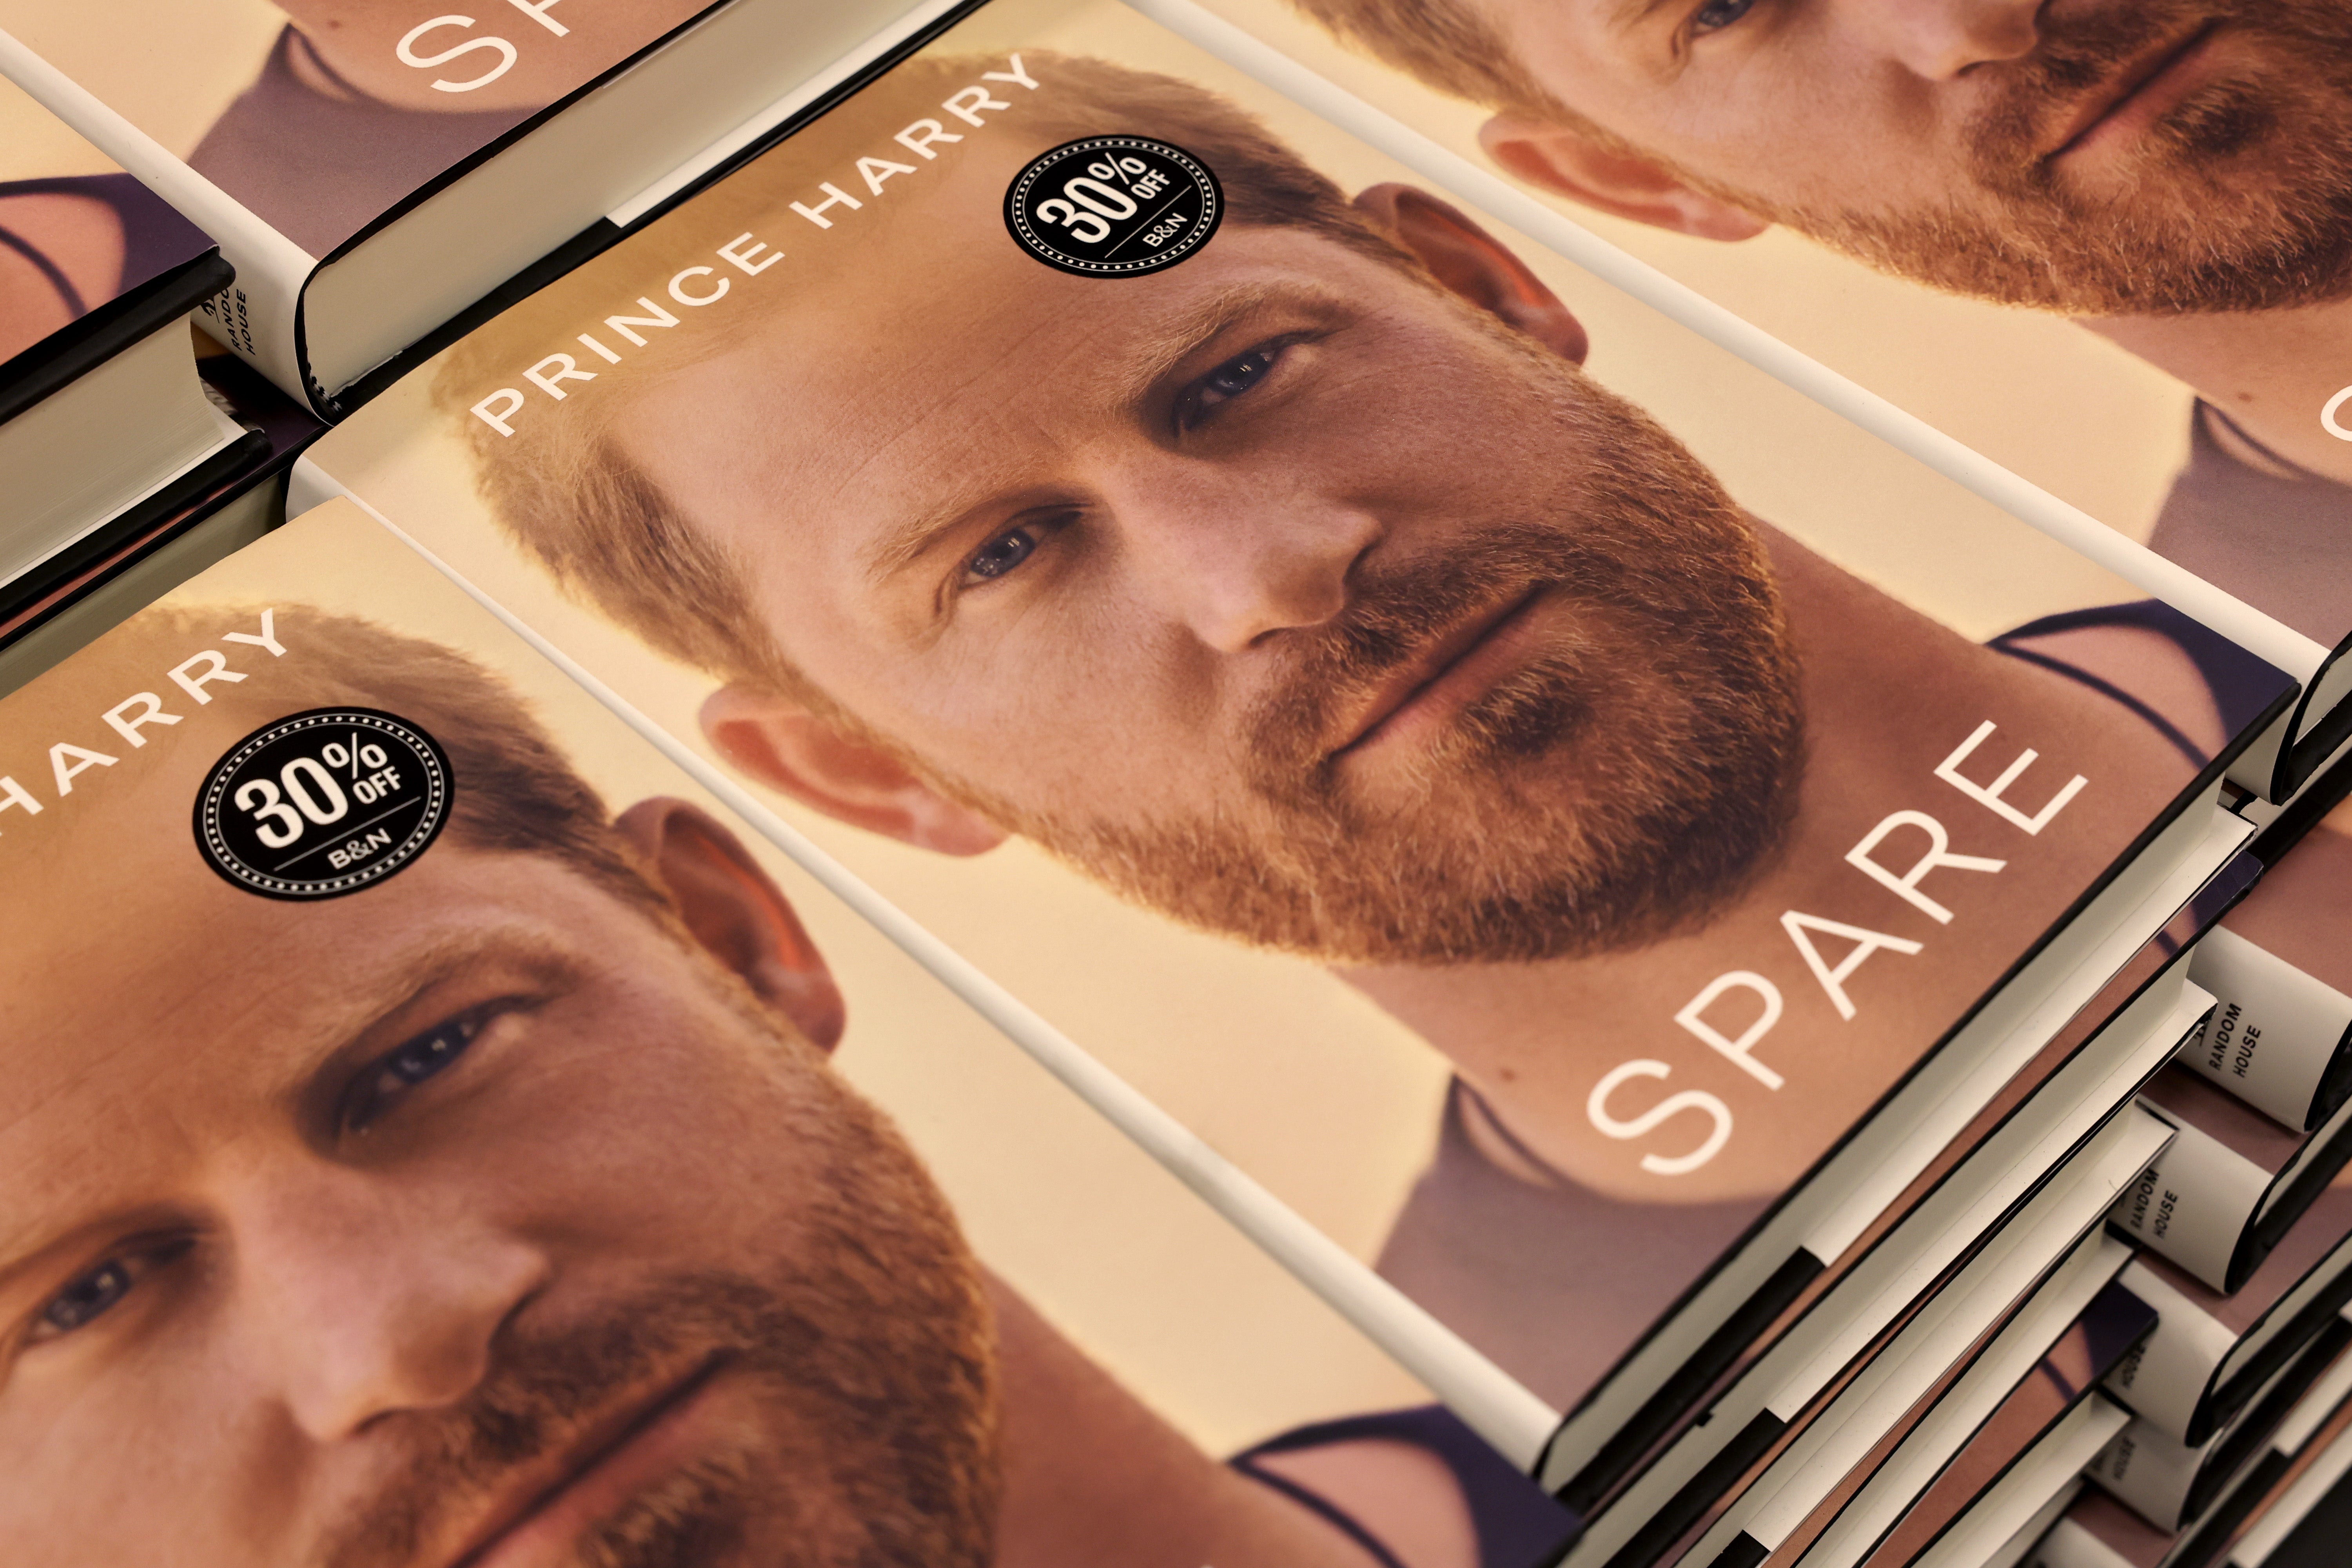 Prince Harry’s memoir Spare is offered for sale at a Barnes & Noble store on 10 January 2023 in Chicago, Illinois